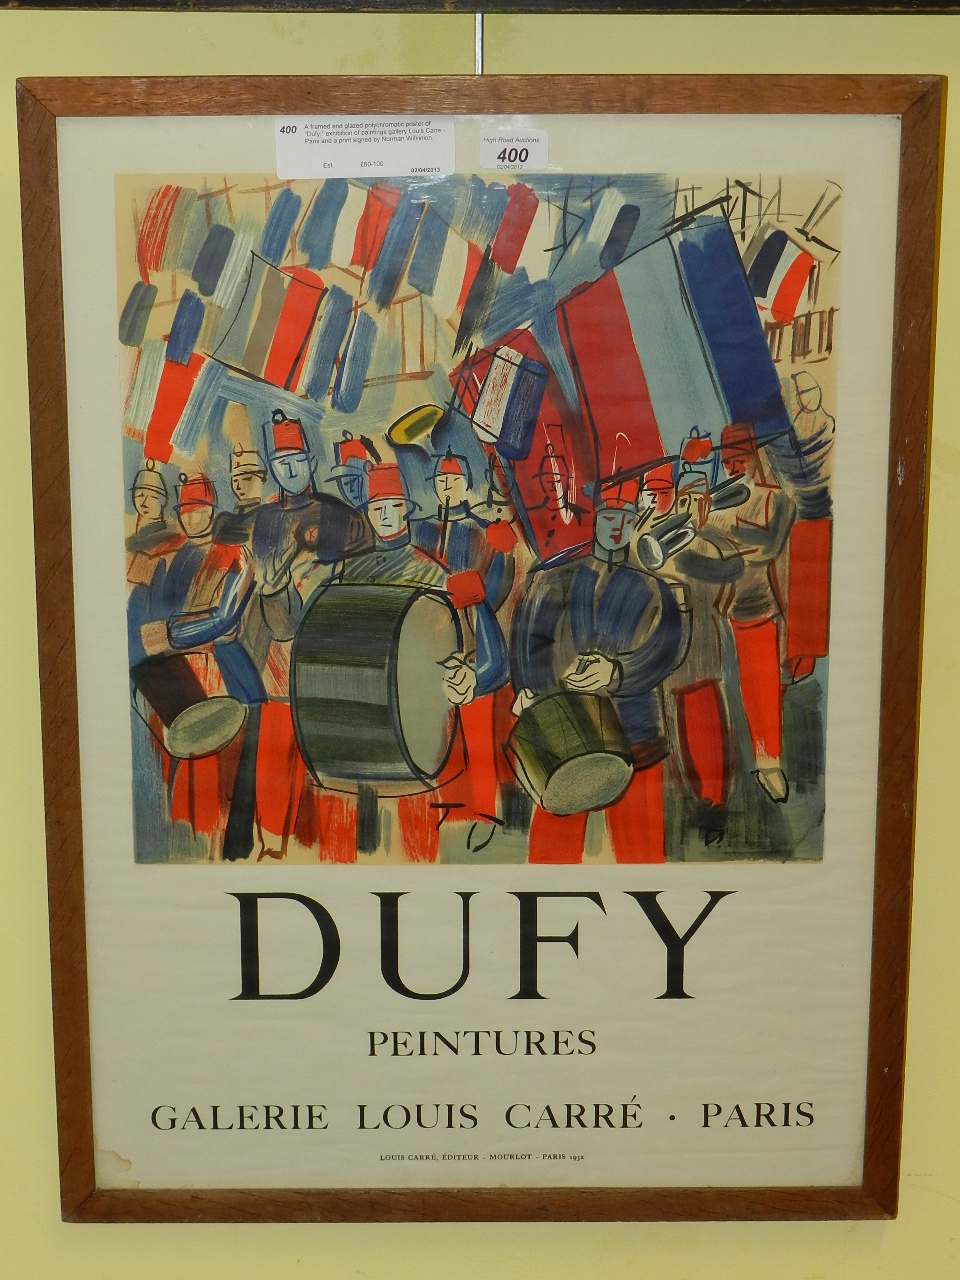 A framed and glazed polychromatic poster of "Dufy," exhibition of paintings gallery Louis Carre -